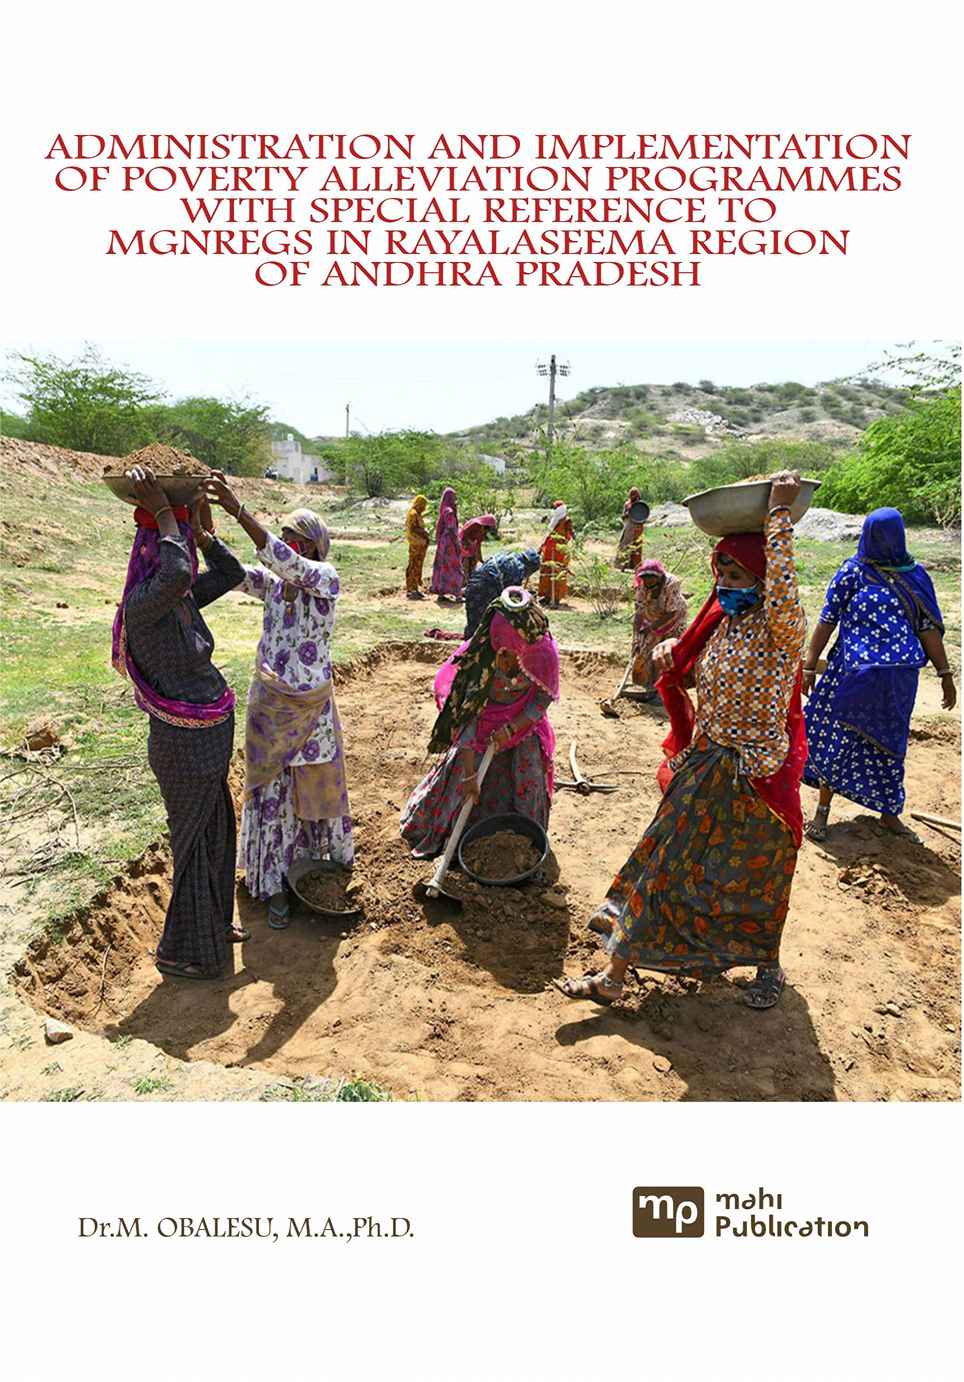 Administration and Implementation Of Poverty Alleviation Programmes With Special Reference to Mgnregs in Rayalaseema Region Of Andhra Pradesh